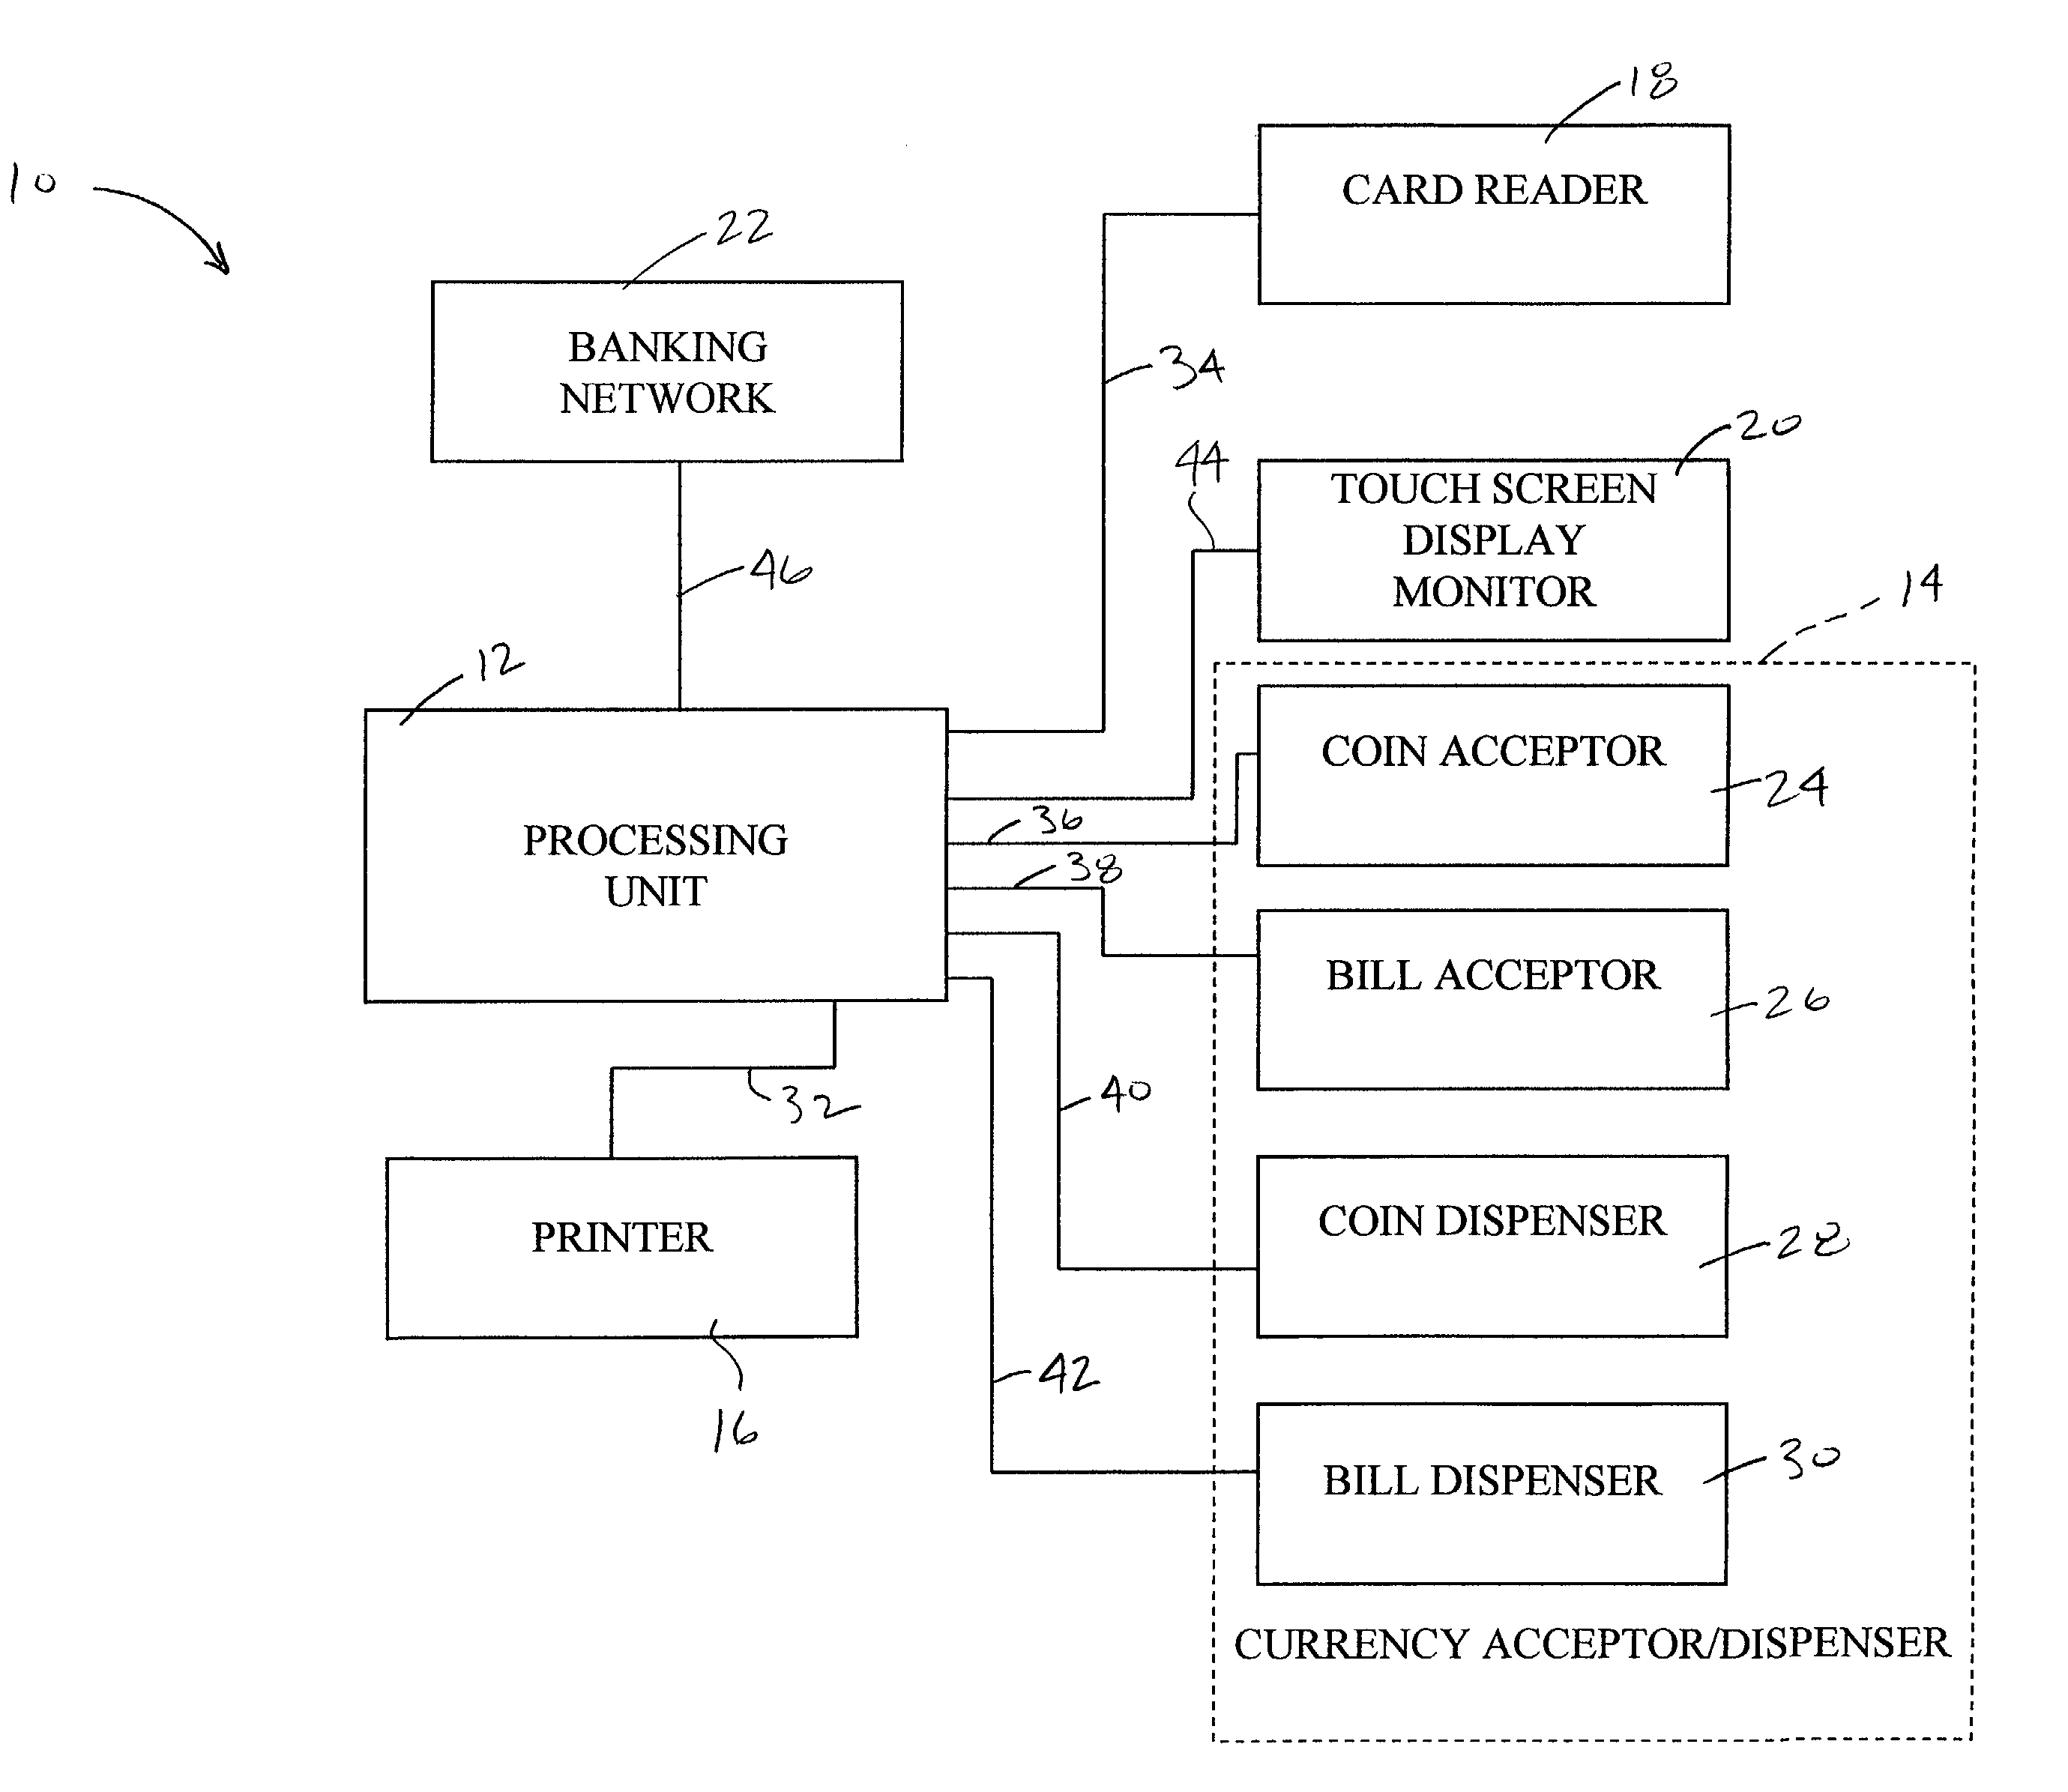 Apparatus and method for maintaining a children's automated bank account